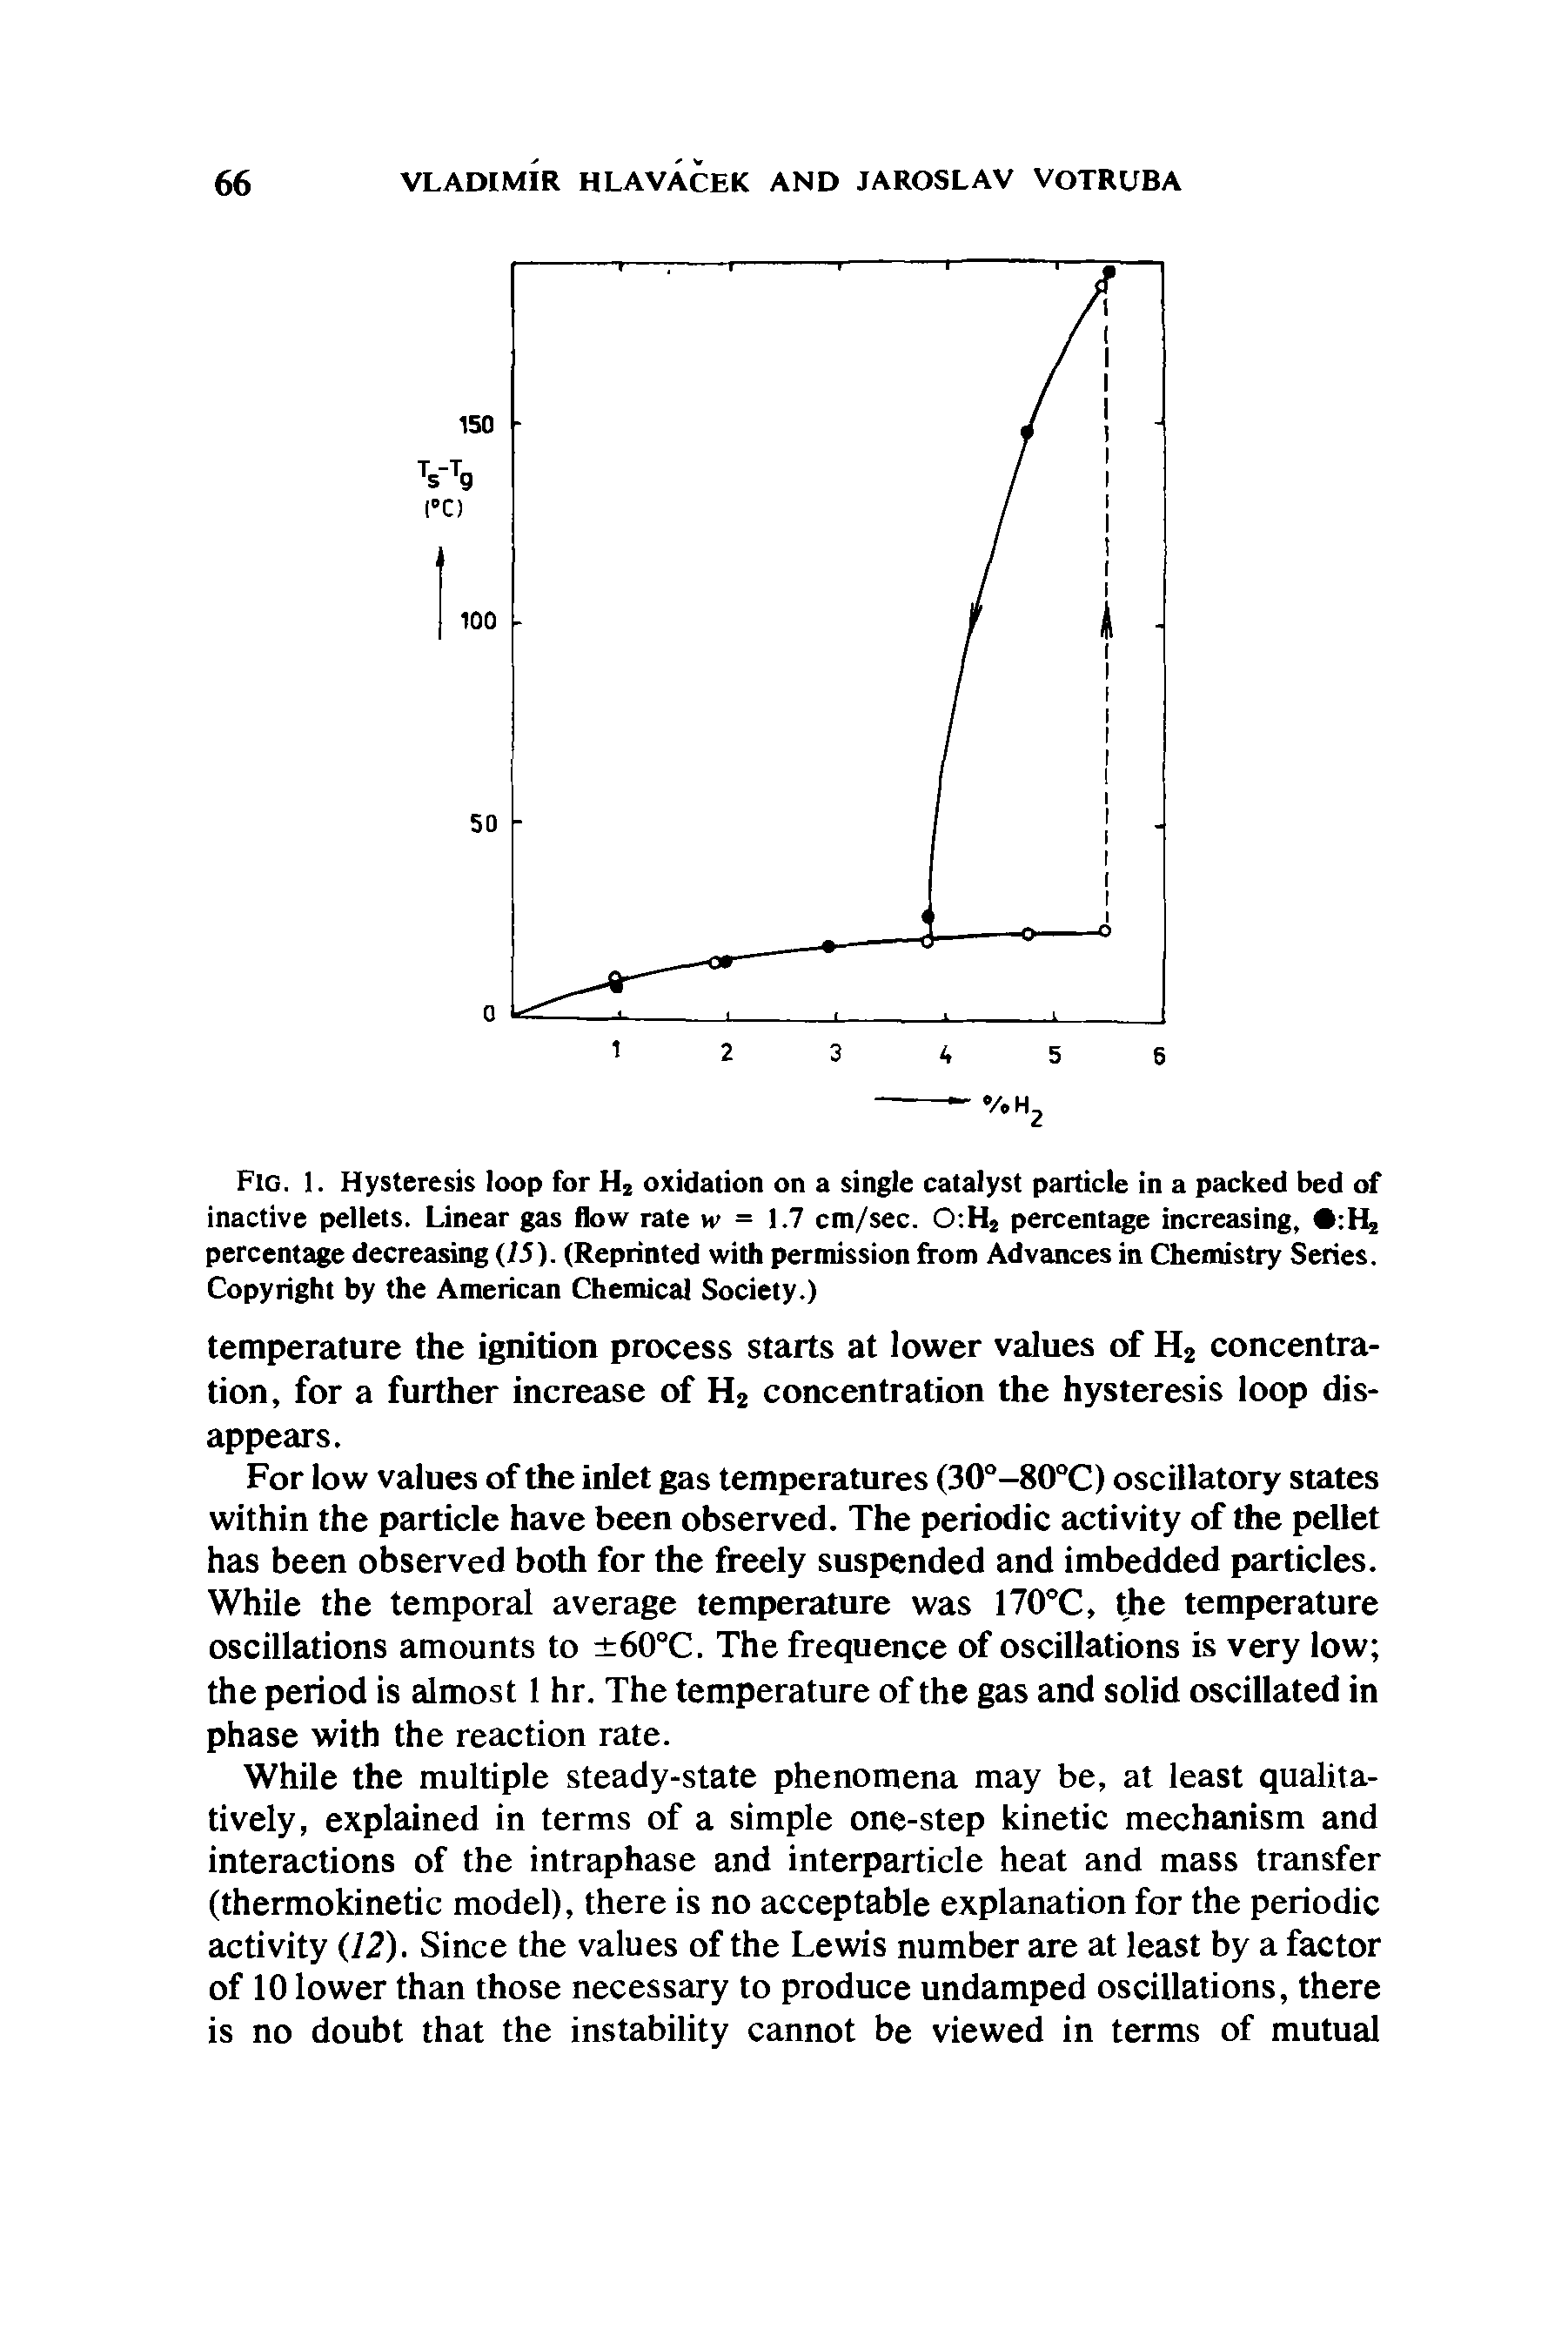 Fig. 1. Hysteresis loop for H2 oxidation on a single catalyst particle in a packed bed of inactive pellets. Linear gas flow rate w = 1.7 cm/sec. 0 H2 percentage increasing, percentage decreasing (75). (Reprinted with permission from Advances in Chemistry Series. Copyright by the American Chemical Society.)...